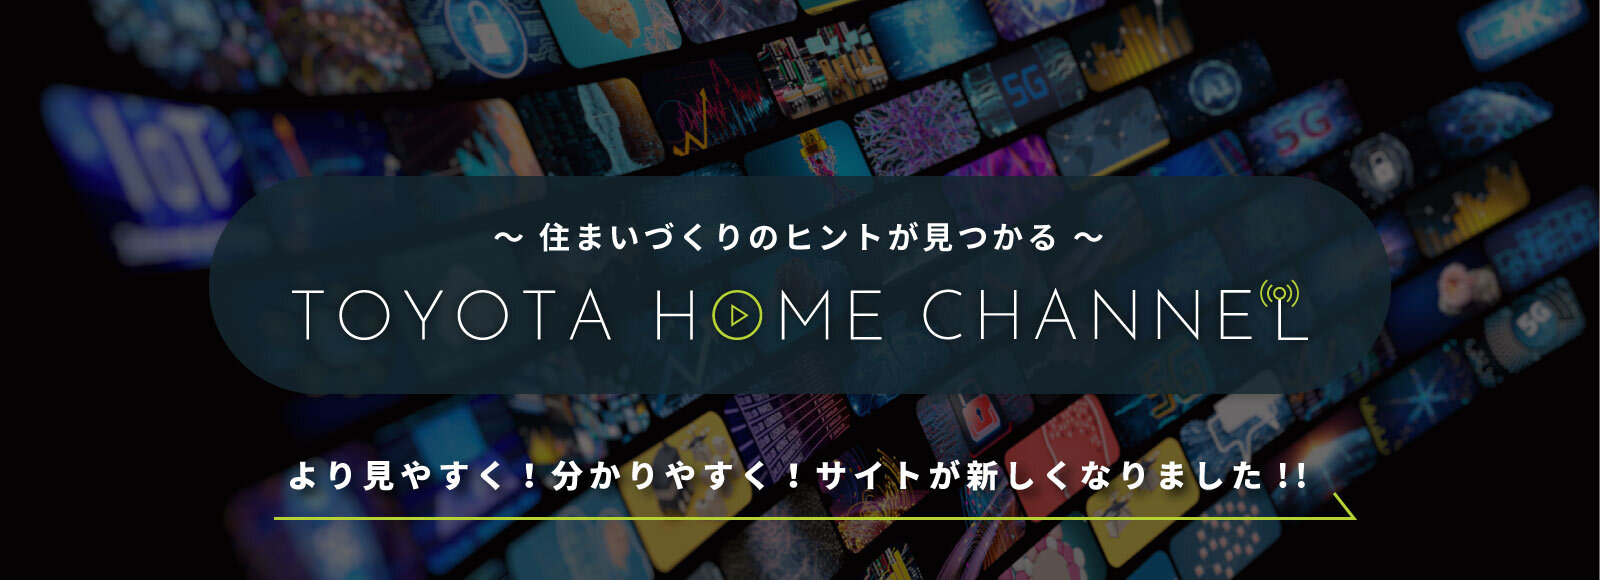 TOYOTA HOME CHANNEL